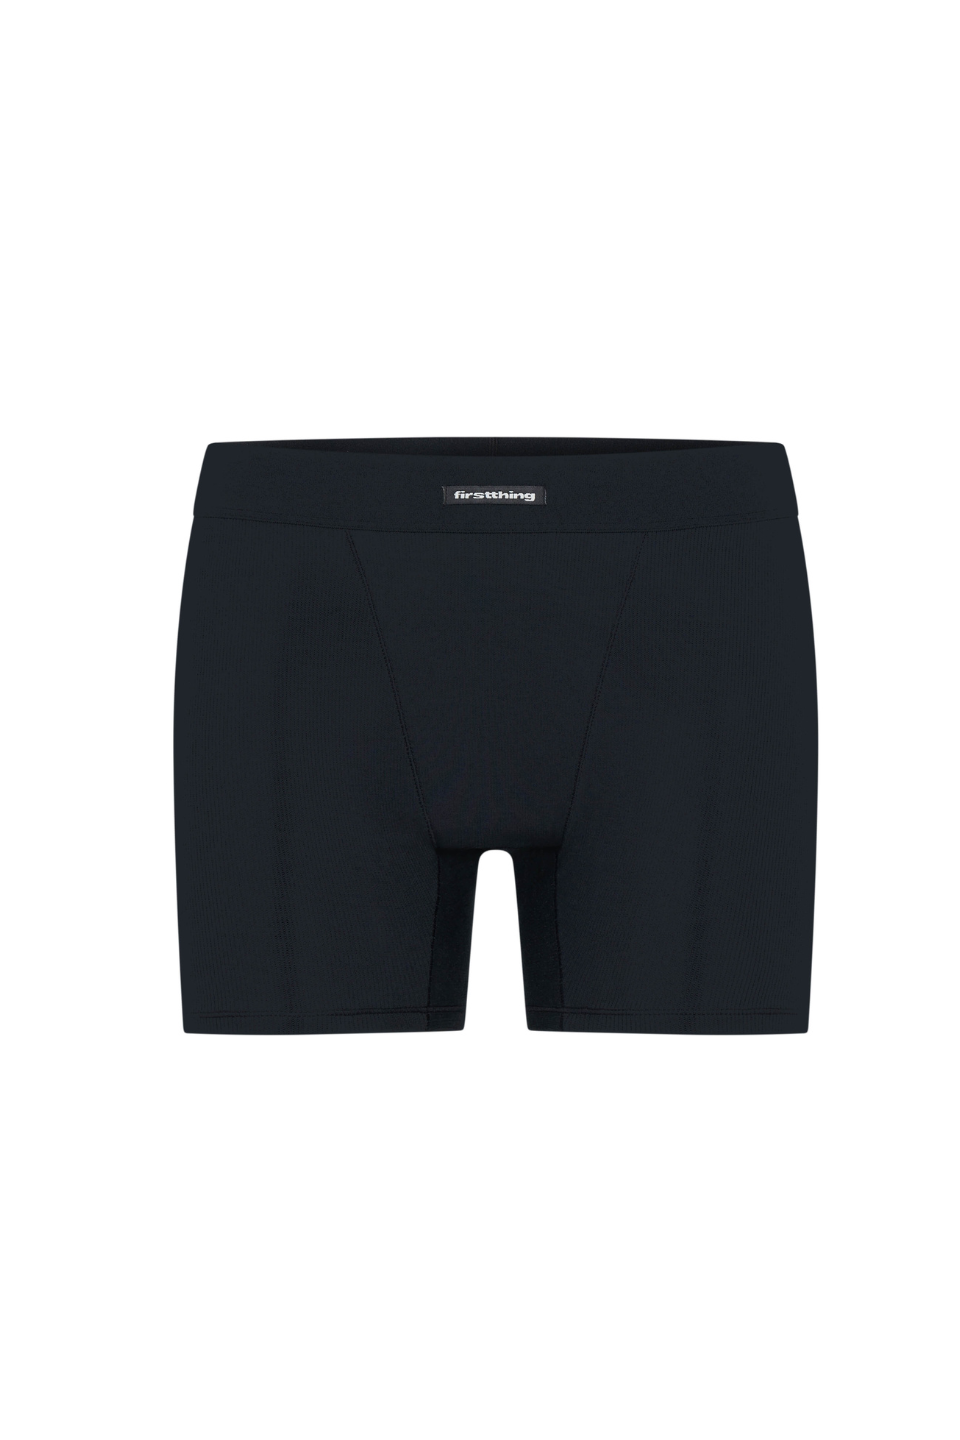 The Ribbed Boxer, Undies - First Thing Underwear